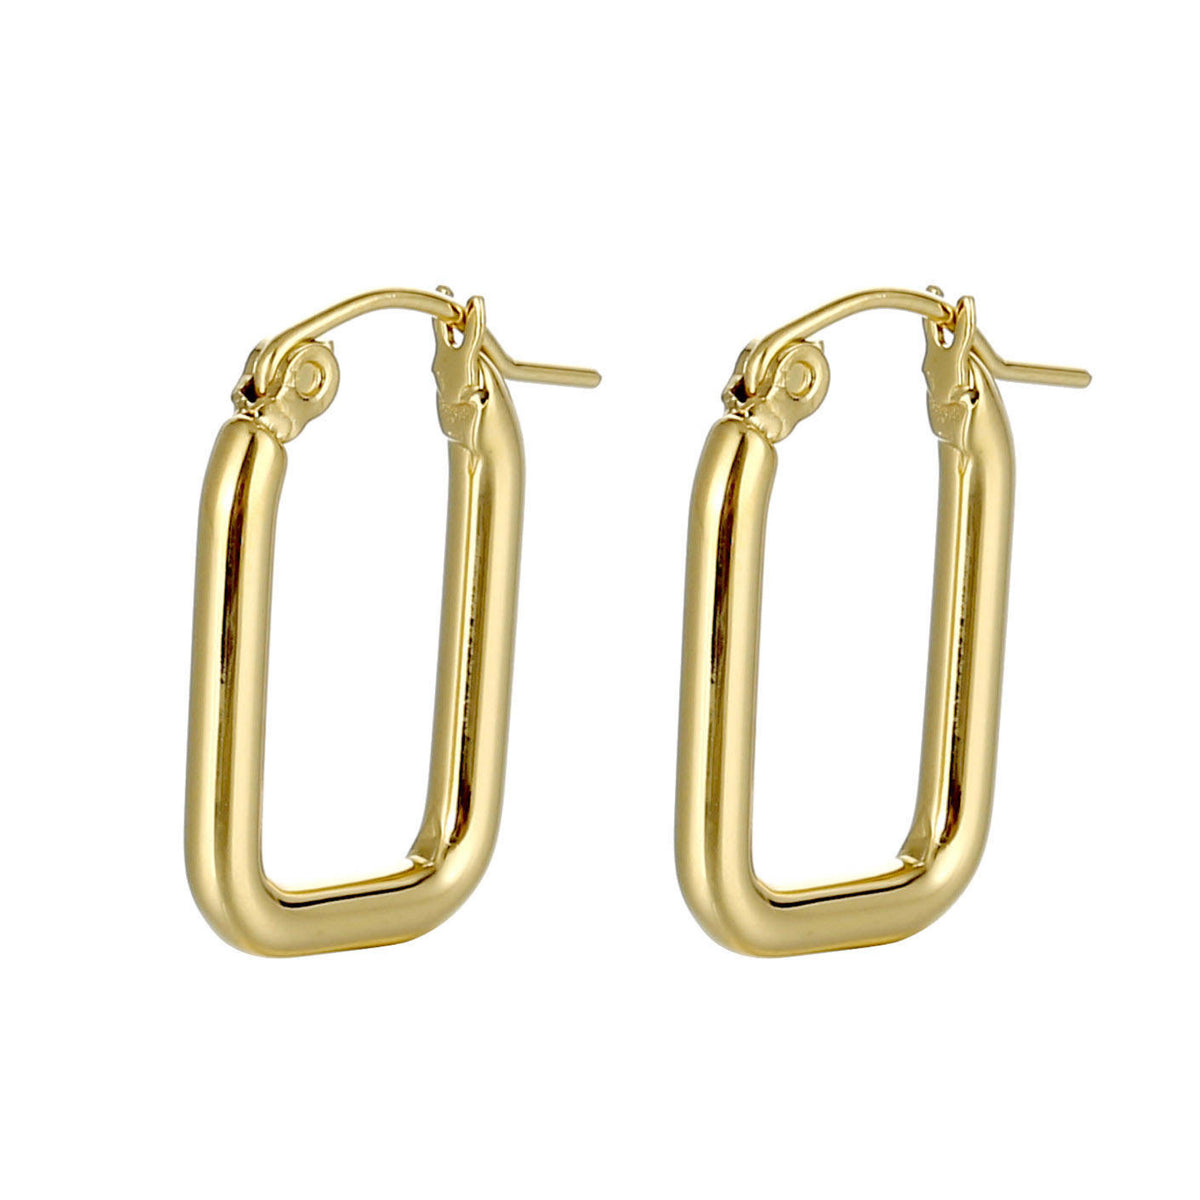 The Charlotte hoops are a modern twist on the classic hoop earring design. These exquisite earrings strike the perfect balance between sophistication and contemporar